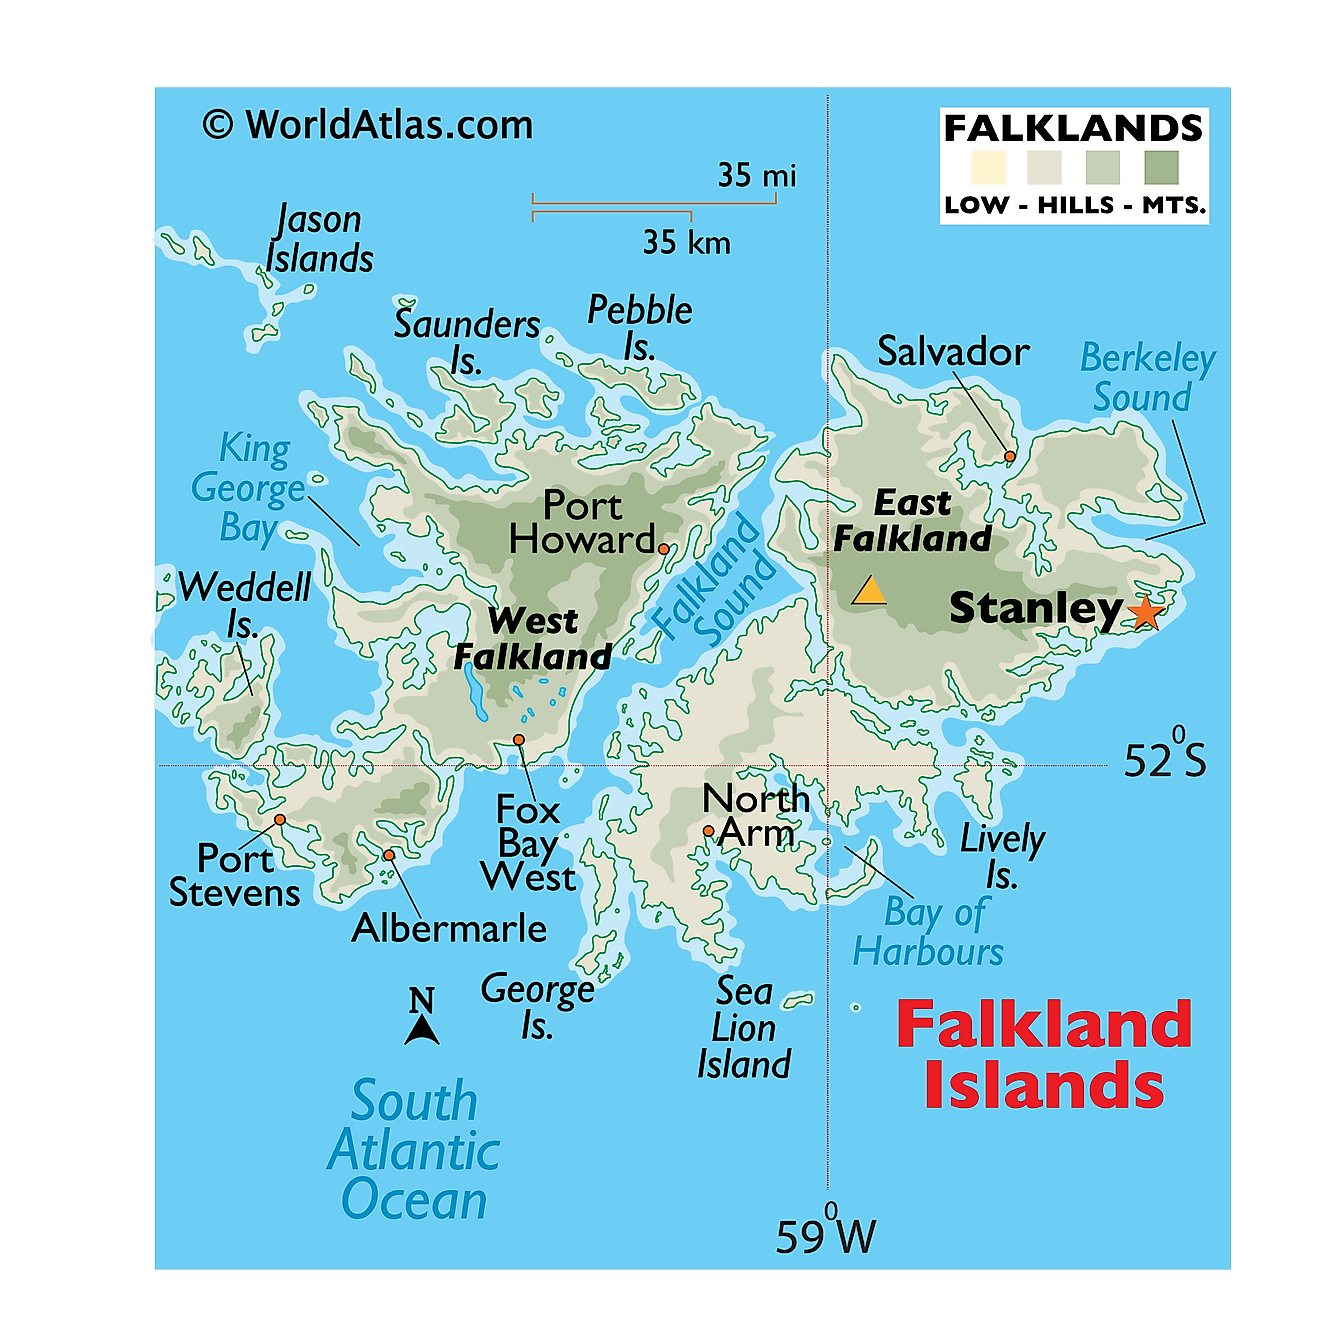 Physical Map of Falkland Islands showing major islands, relief, important settlements, and more.